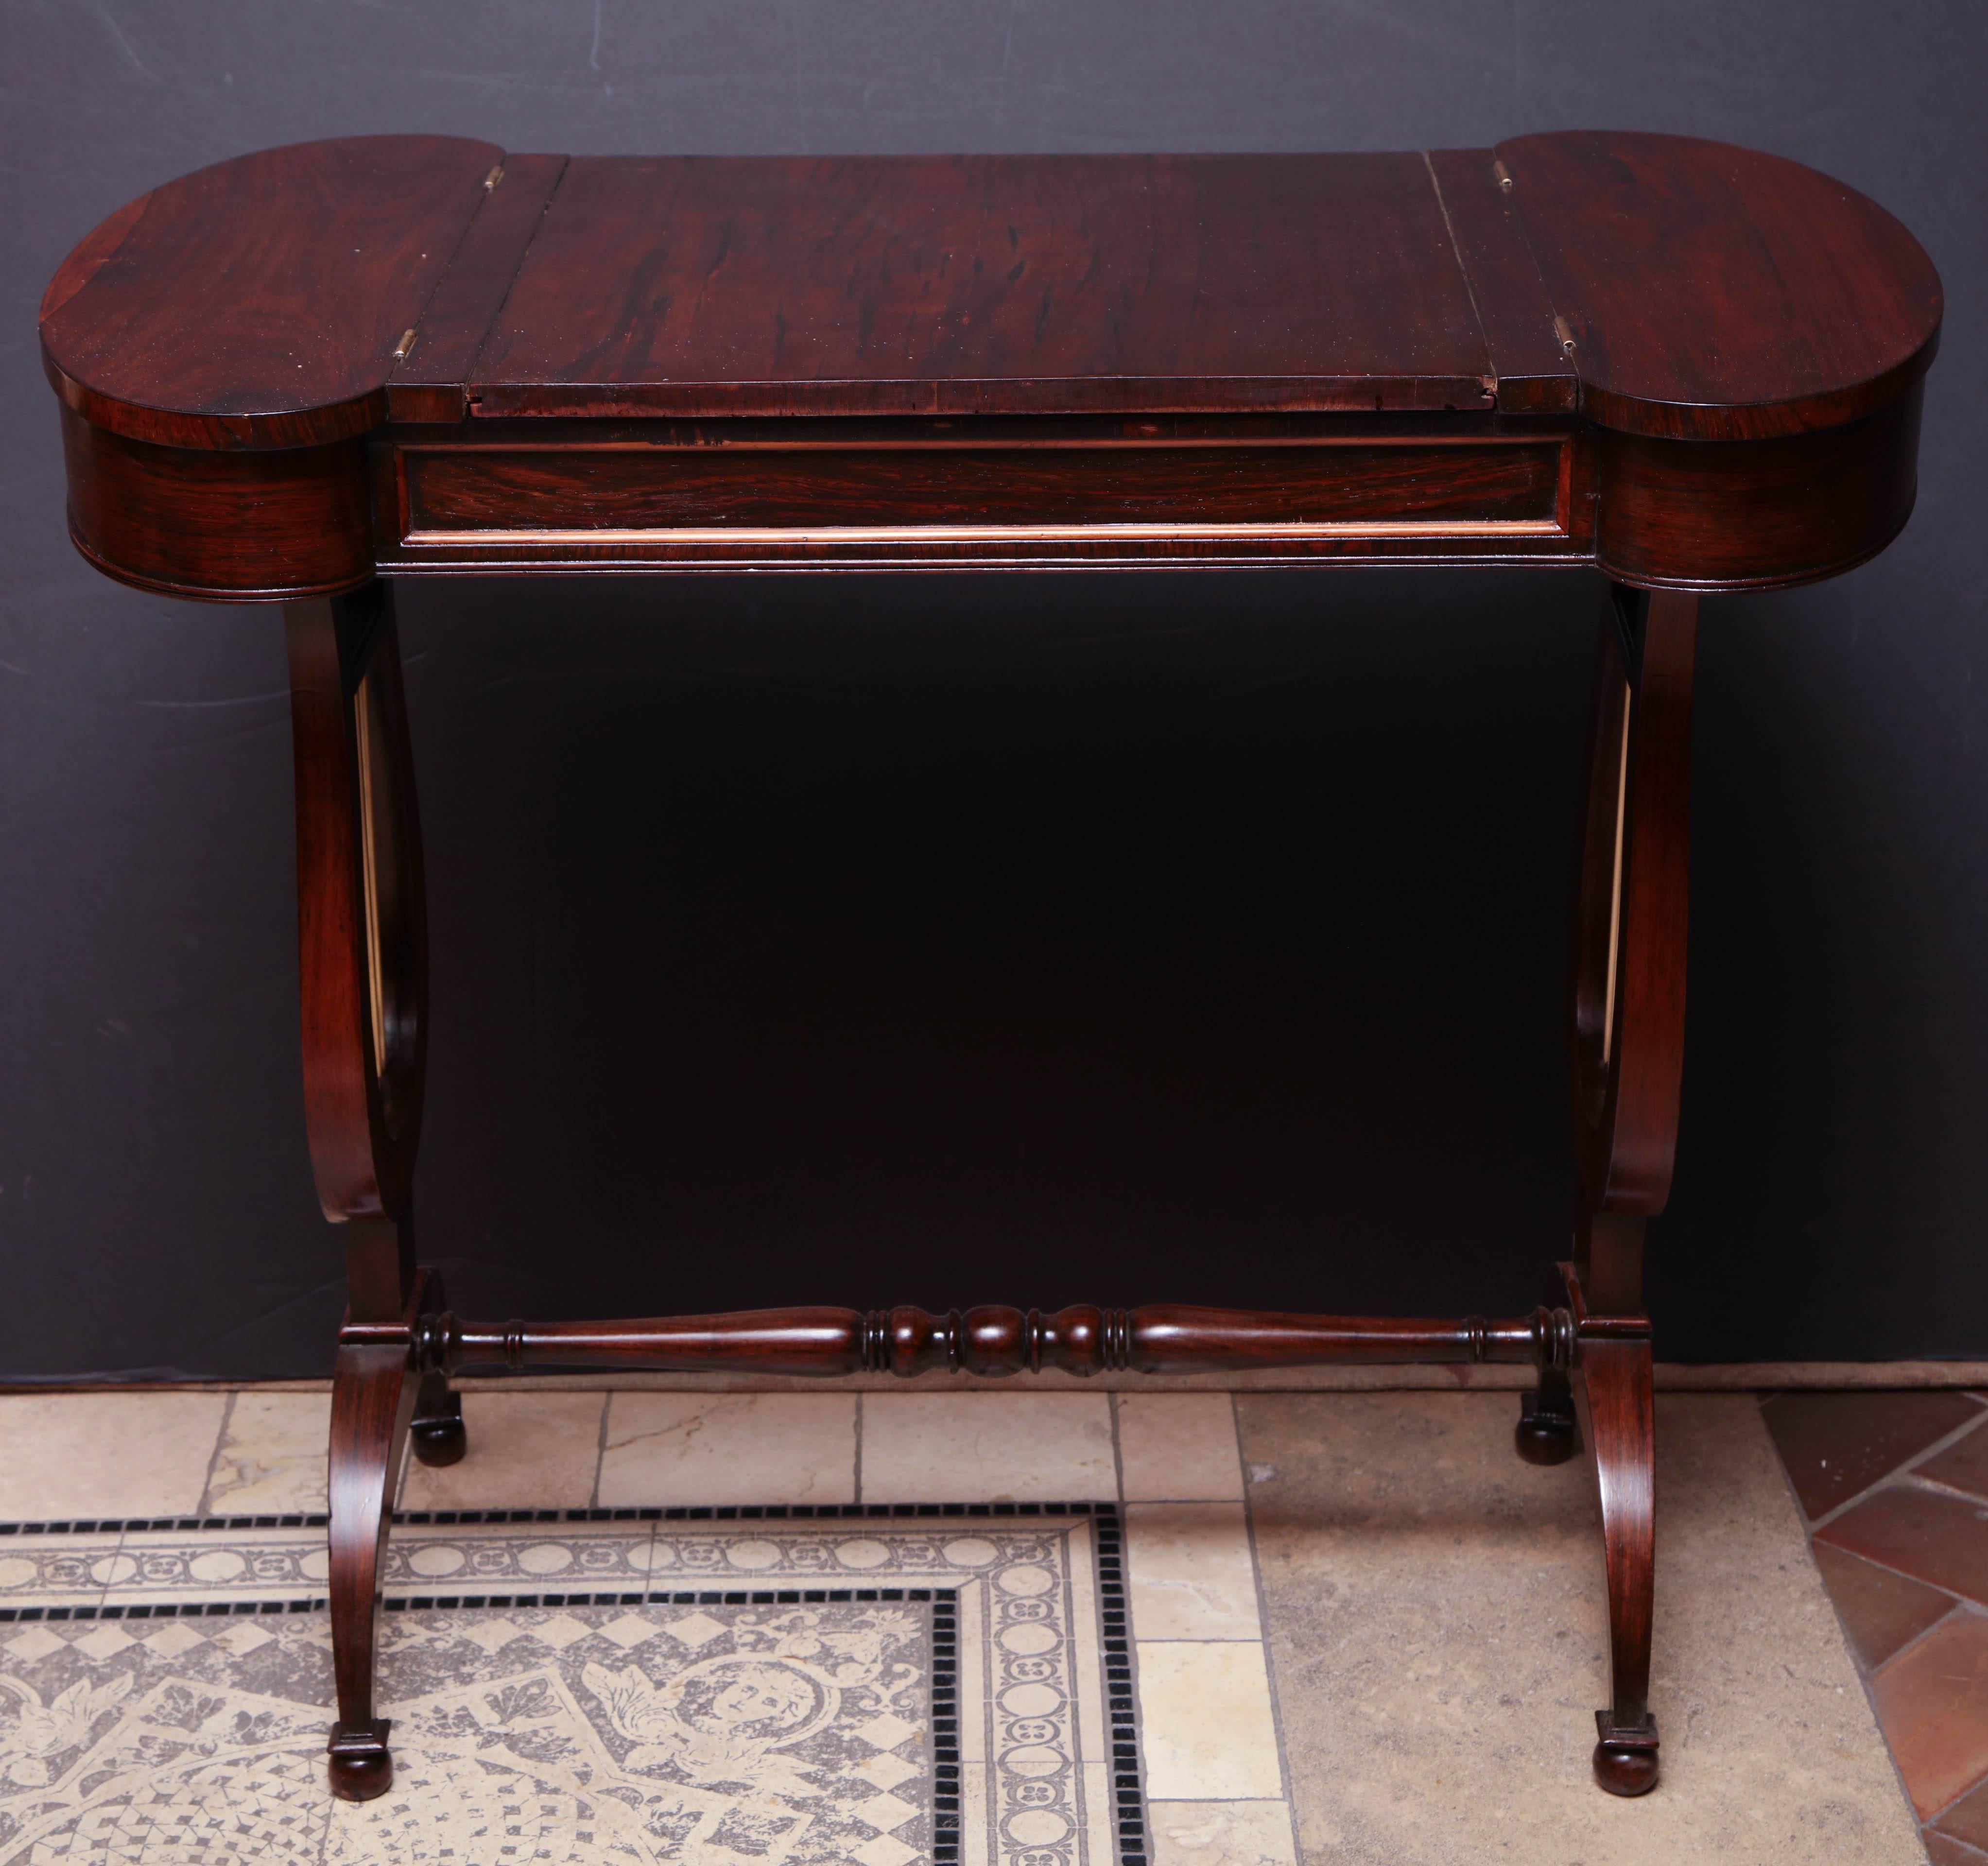 Regency mahogany game table with lyre end supports, backgammon interior playing surface and a turned stretcher base.